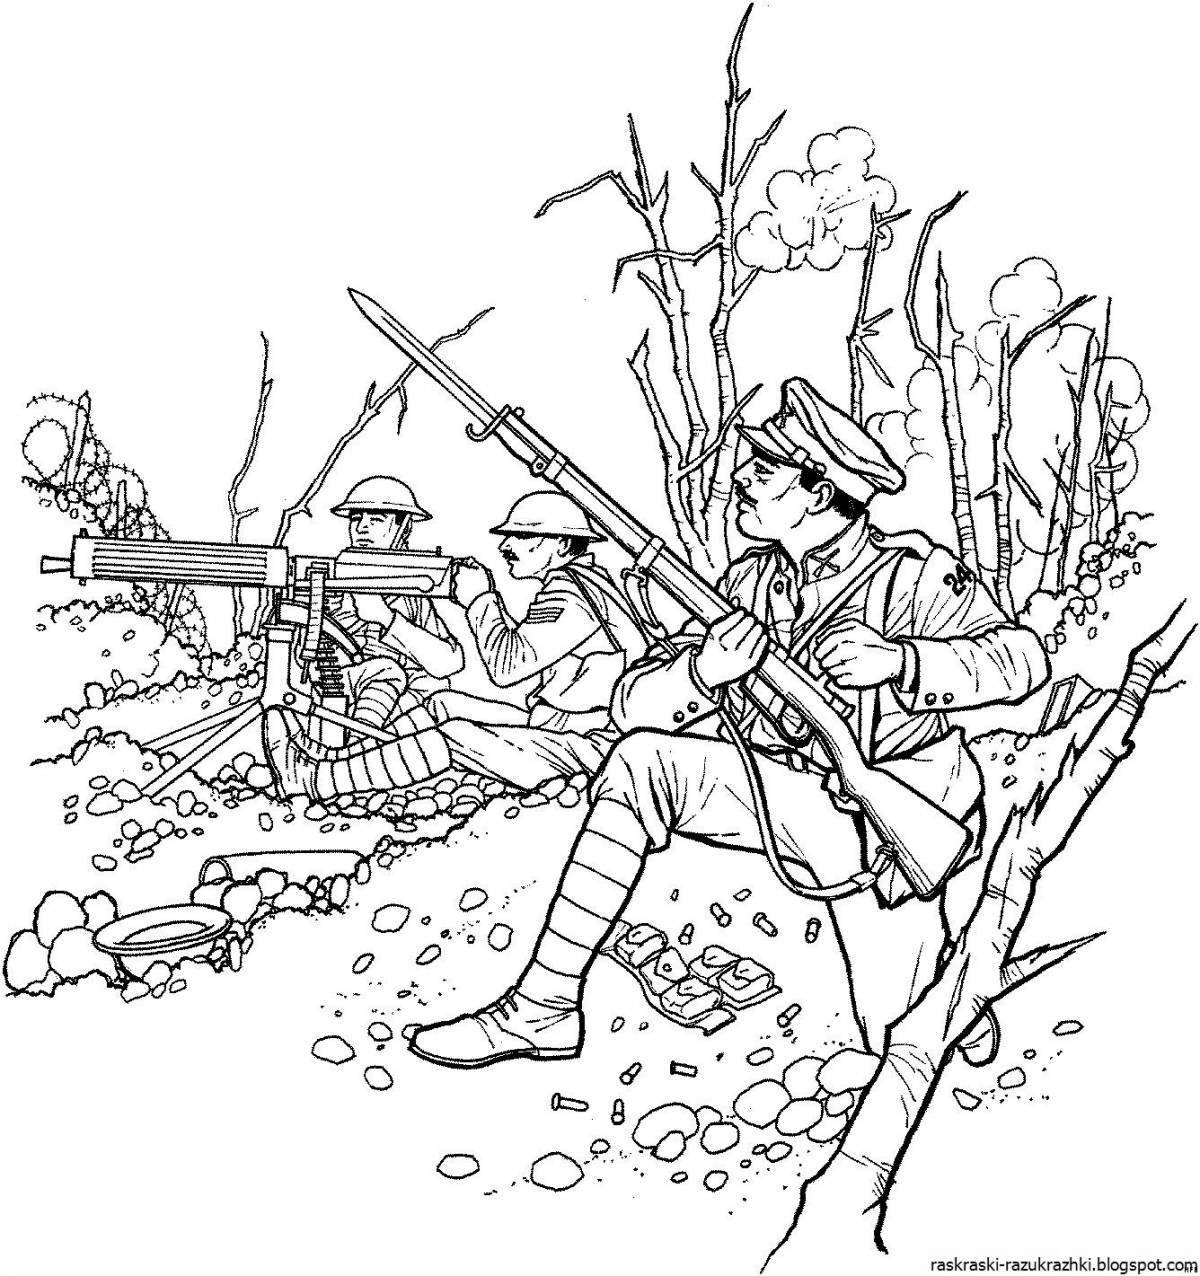 Refreshing war coloring page for 6-7 year olds